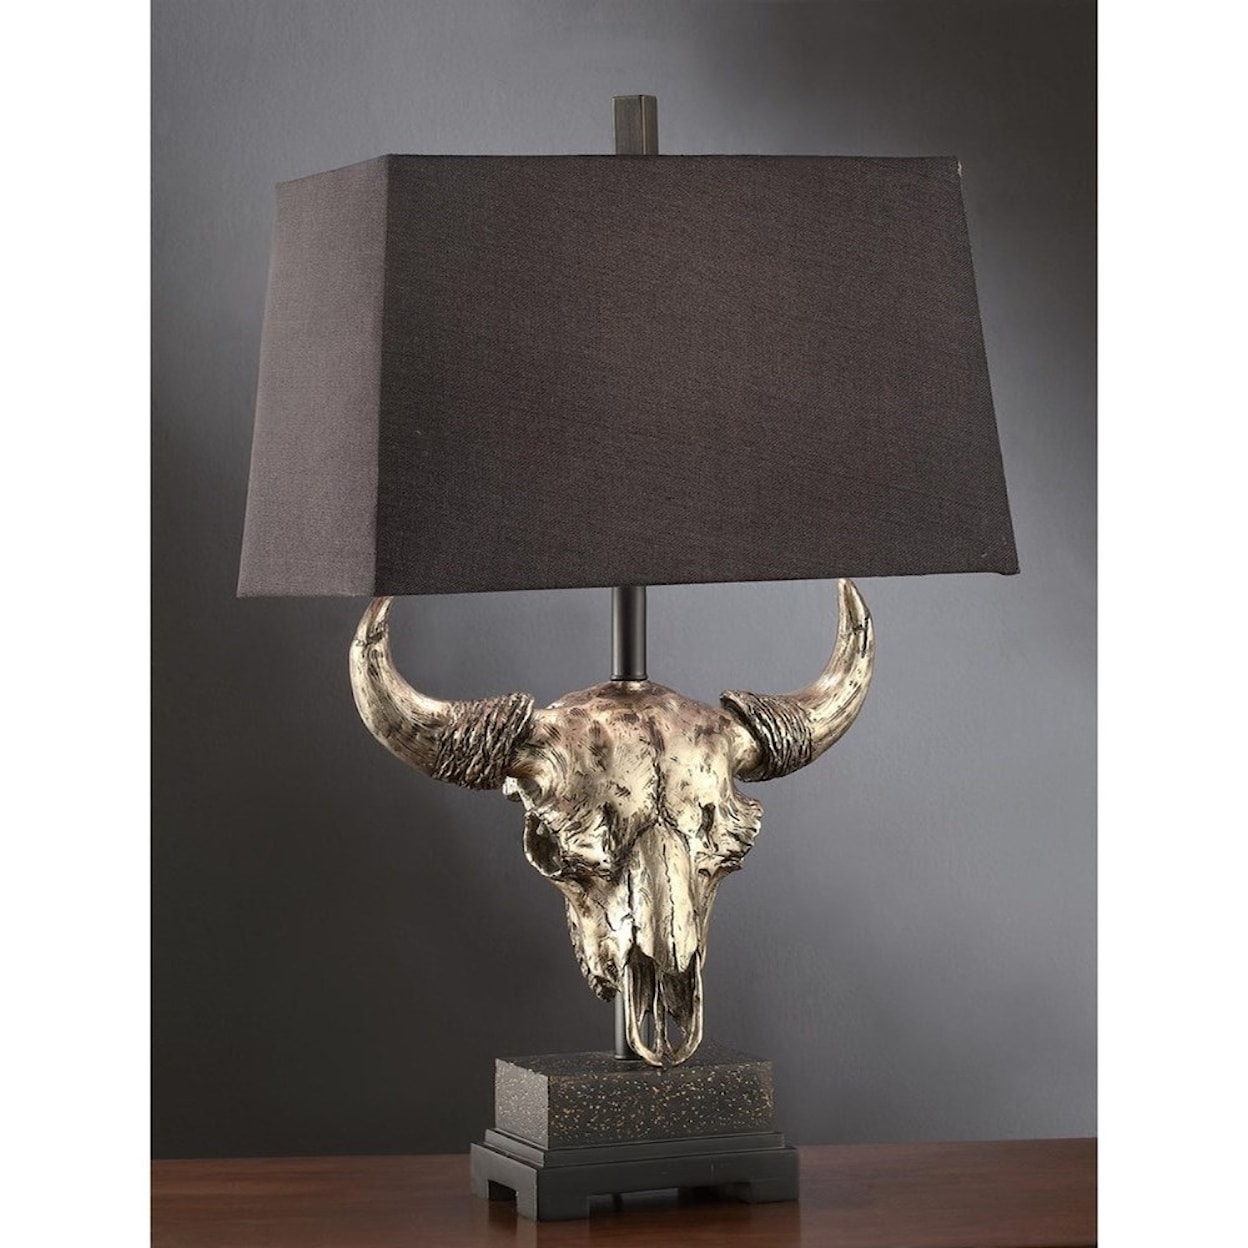 Crestview Collection Lighting Master Of The Prairies Table Lamp